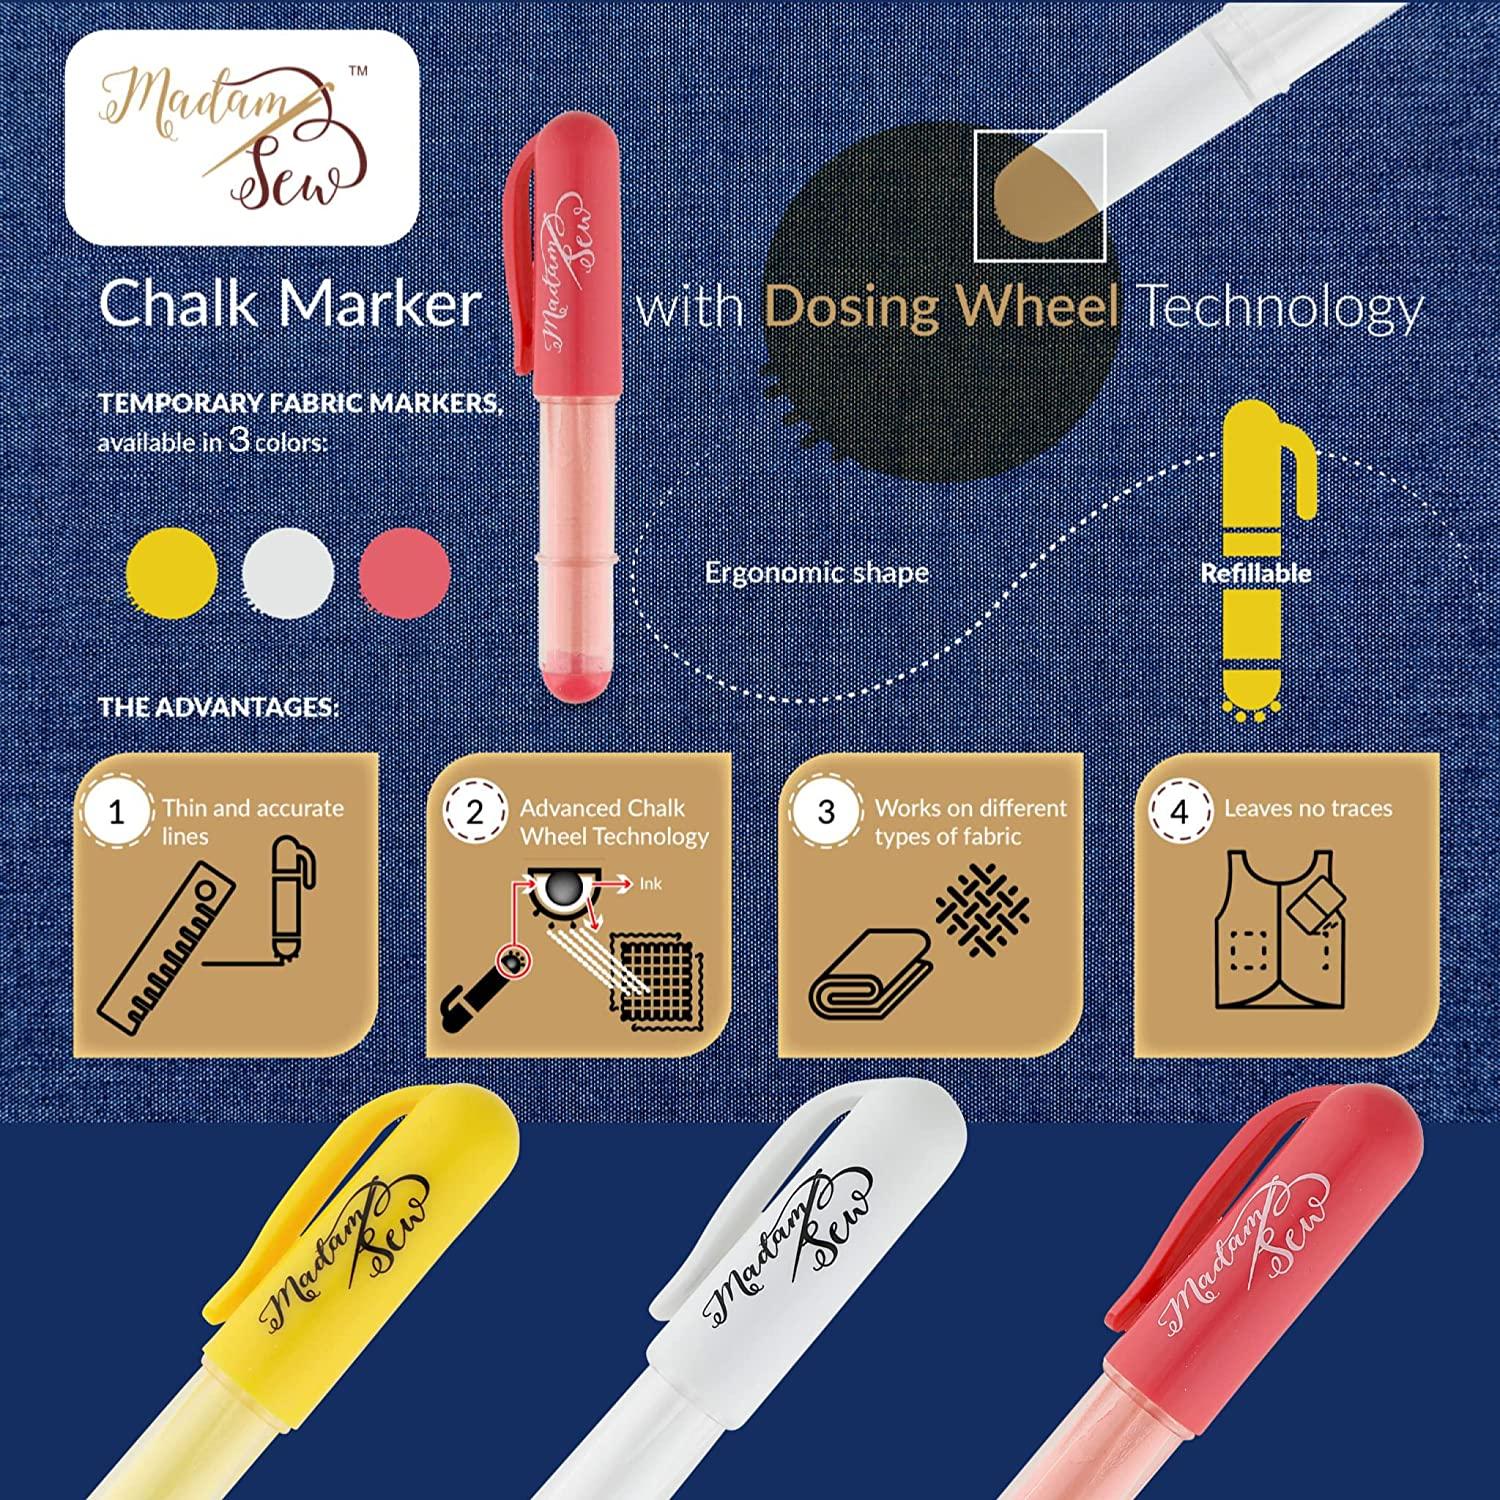 Madam Sew Chalk Fabric Marker for Sewing, Quilting & Crafting, White, Tailors Liner Pen Creates Consistent Erasable Lines with Dosing Wheel  Technology